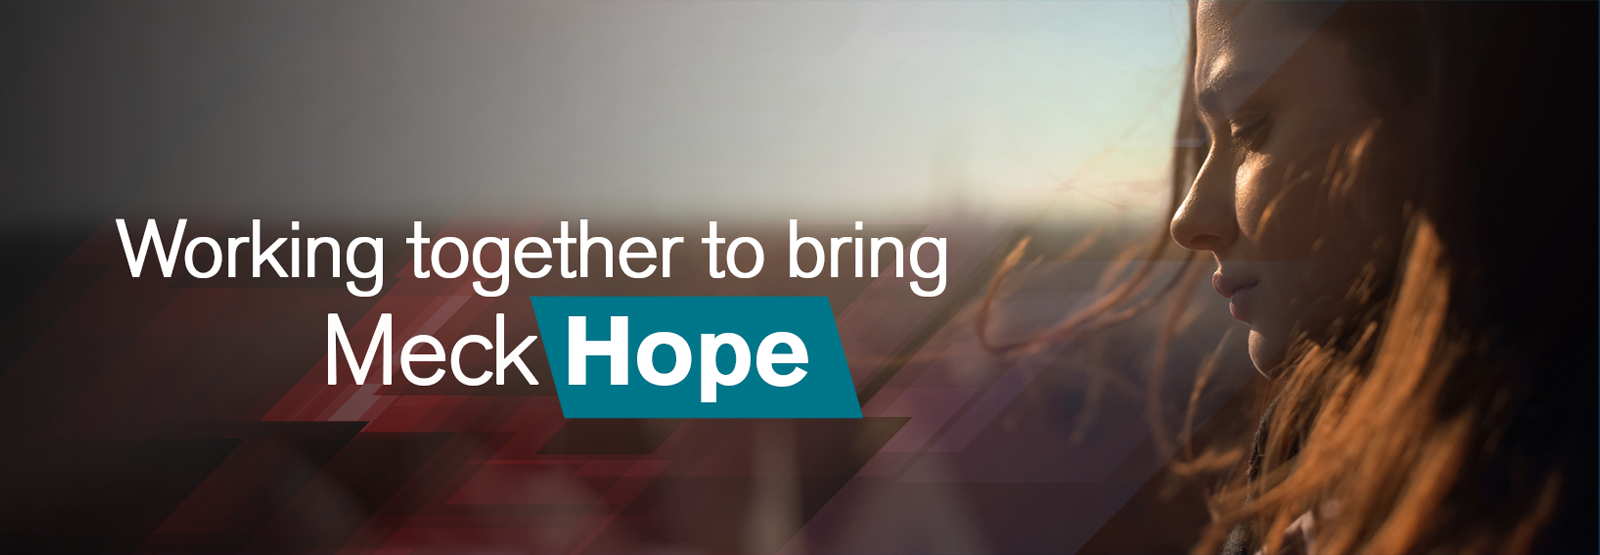 Header for MeckHope with tagline, Working together to bring MeckHope and a photo of a sad woman.